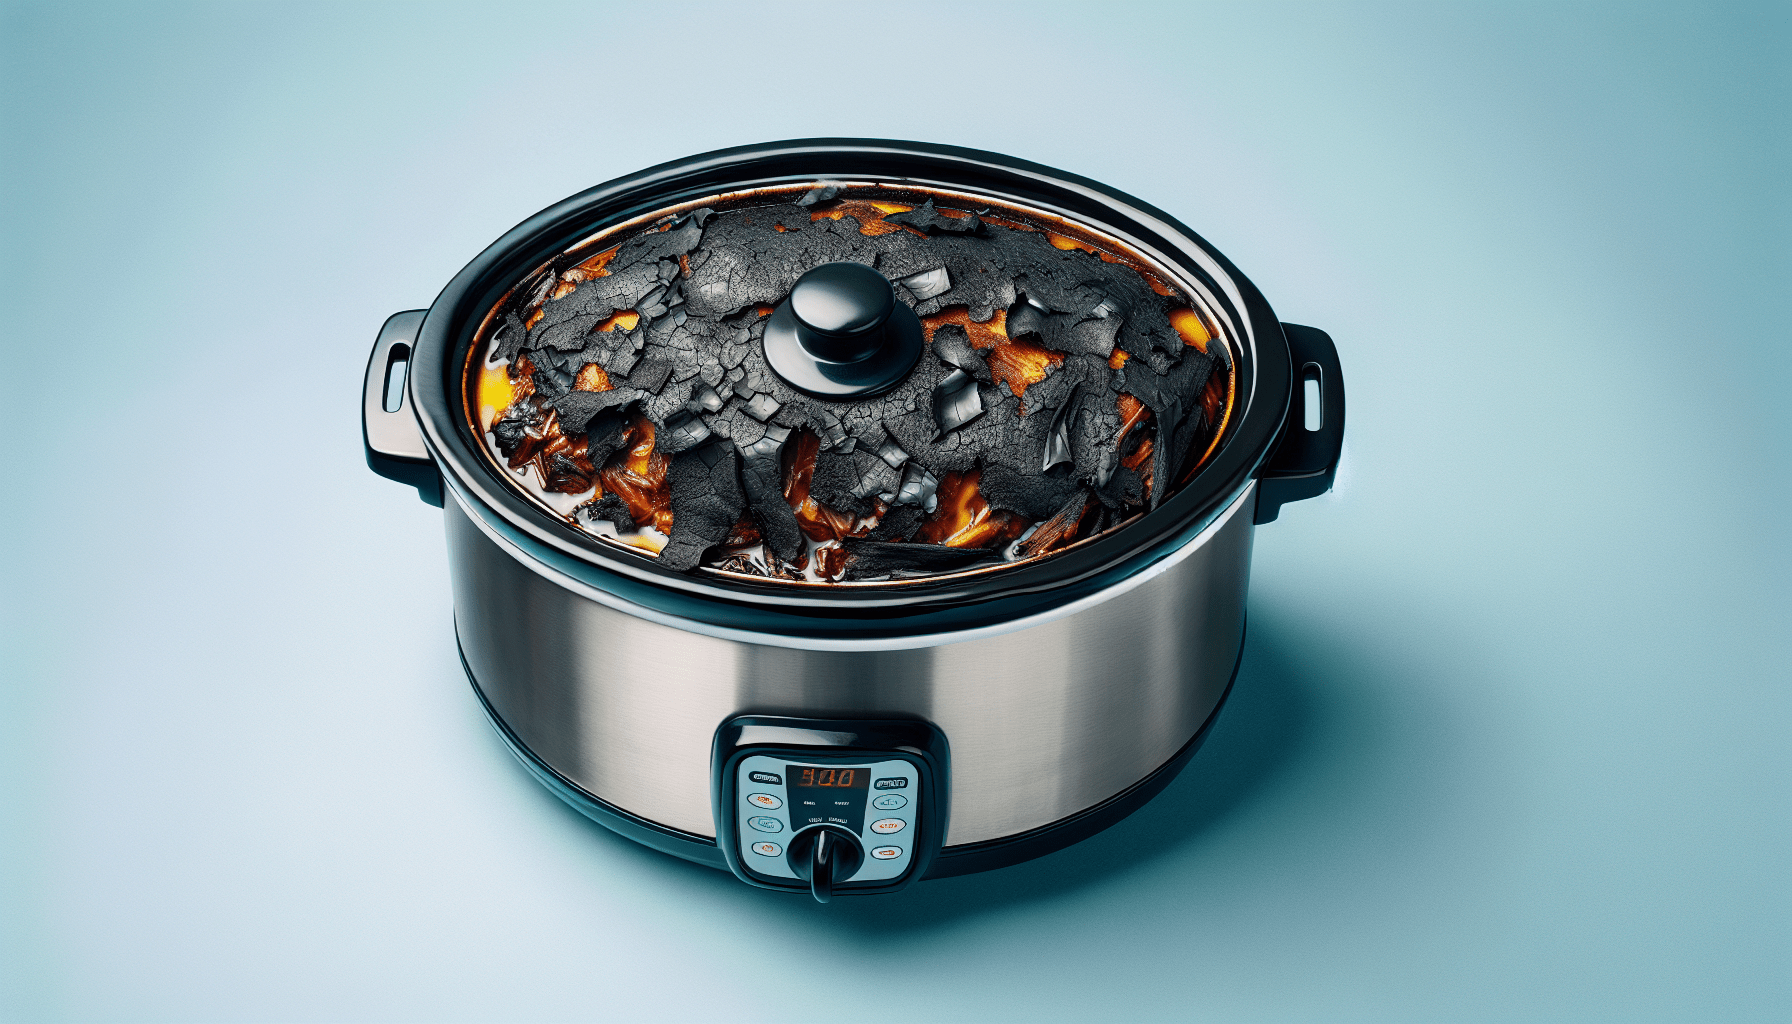 What Not To Do With A Slow Cooker?